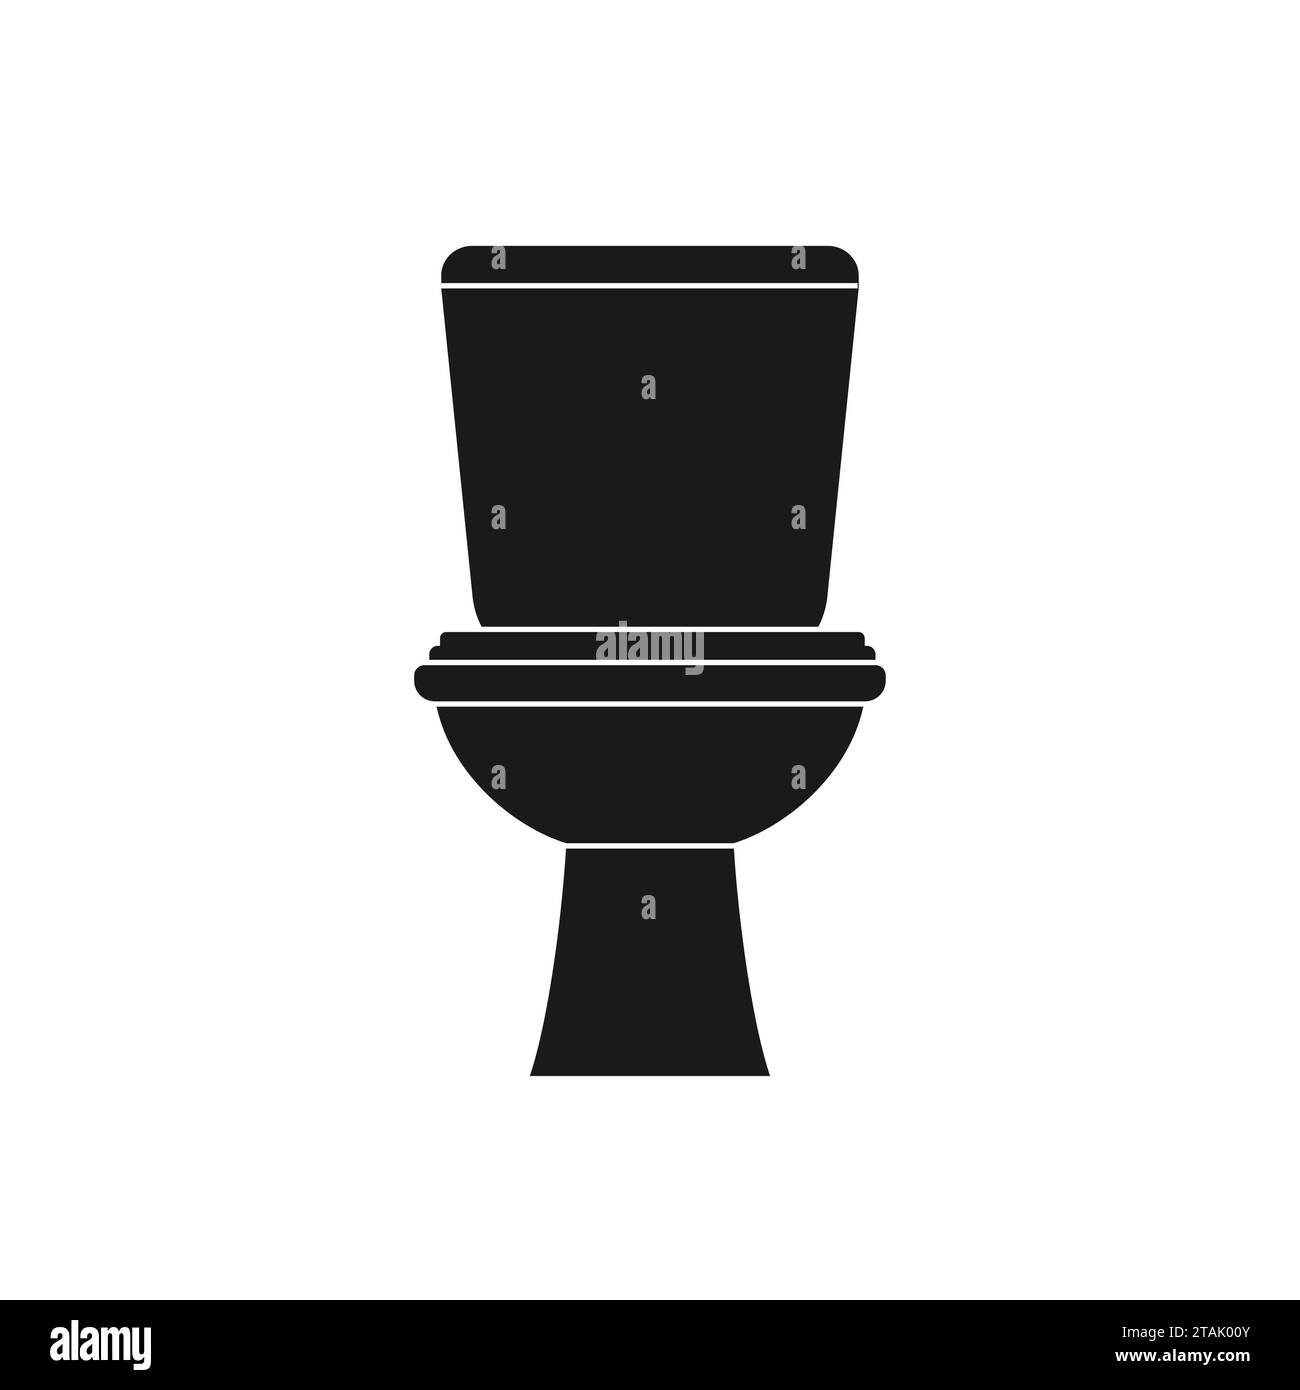 Classic black toilet bowl with water tank icon in flat style isolated on white background. Equipment and accessories for restroom. Lavatory Stock Vector